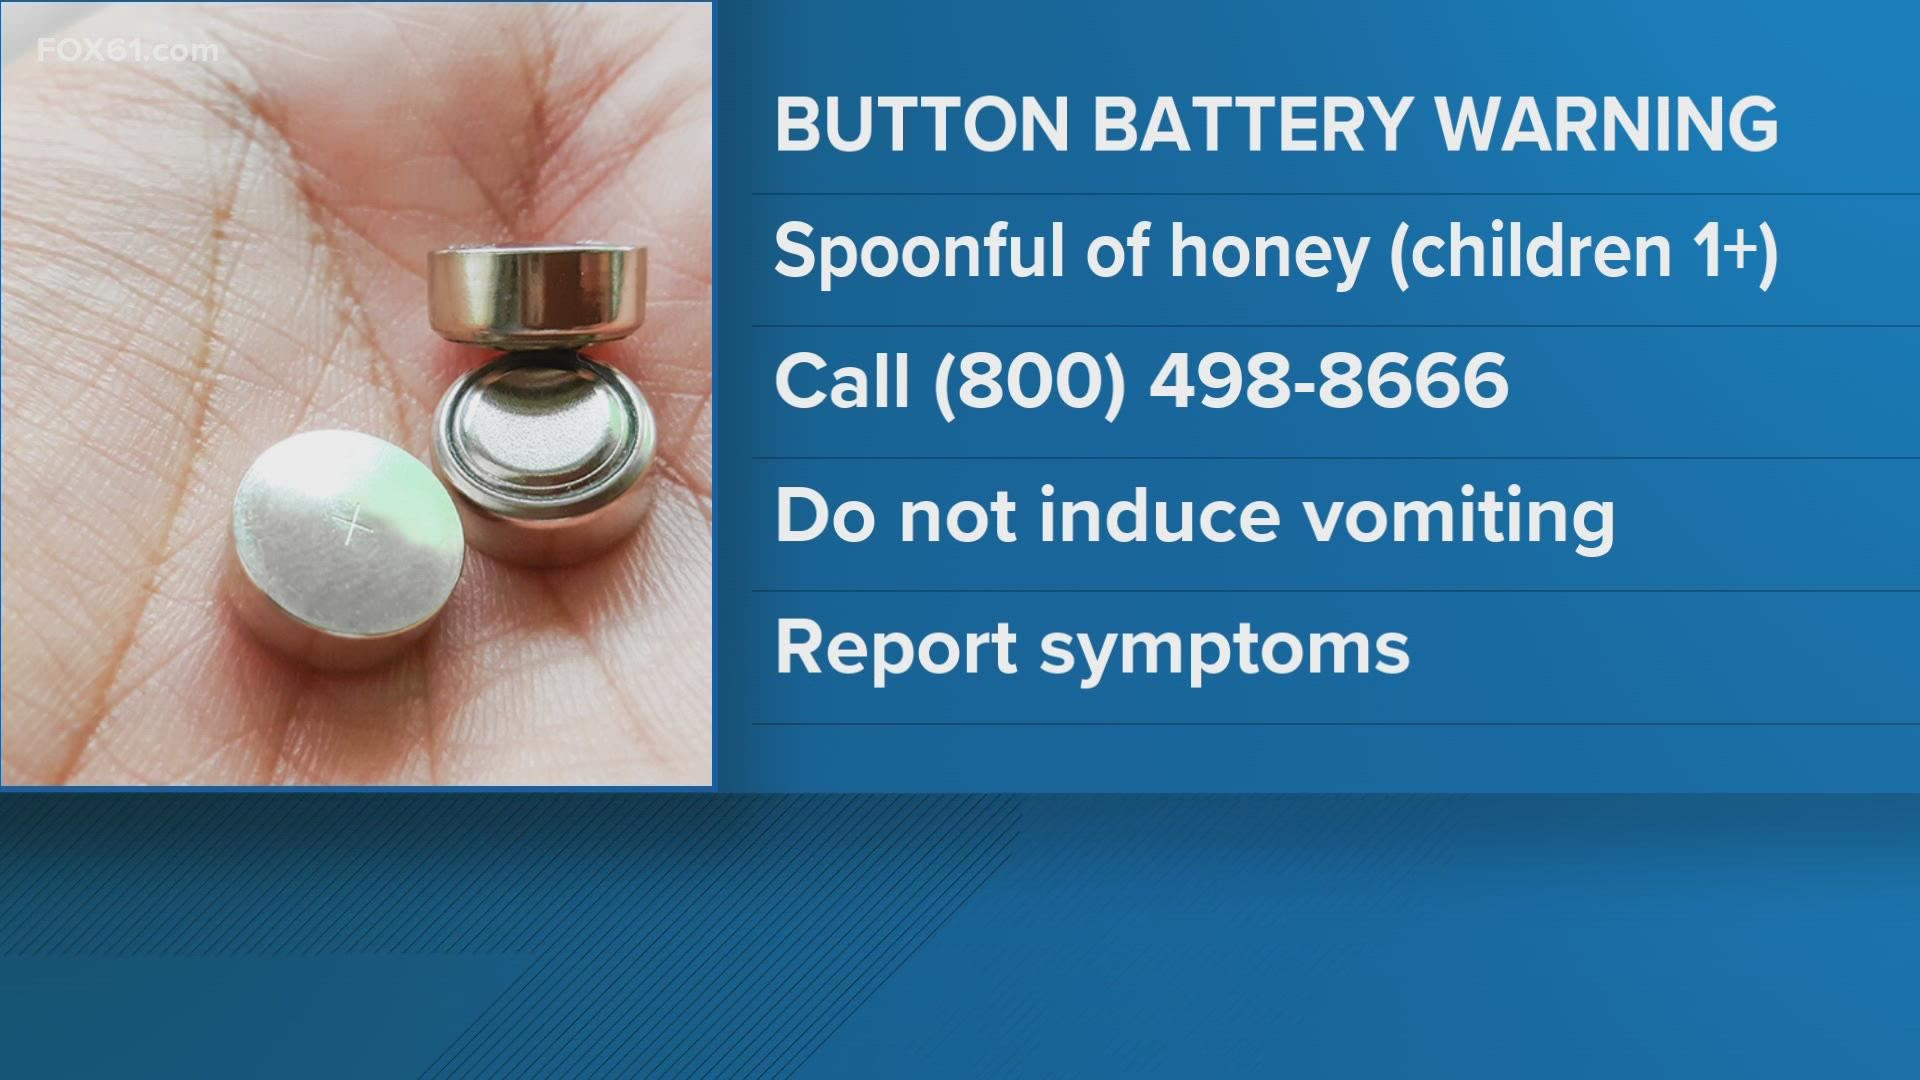 More than 2,800 kids every year are treated in ERs after swallowing button batteries. Here's how you can avoid the tragic accident.